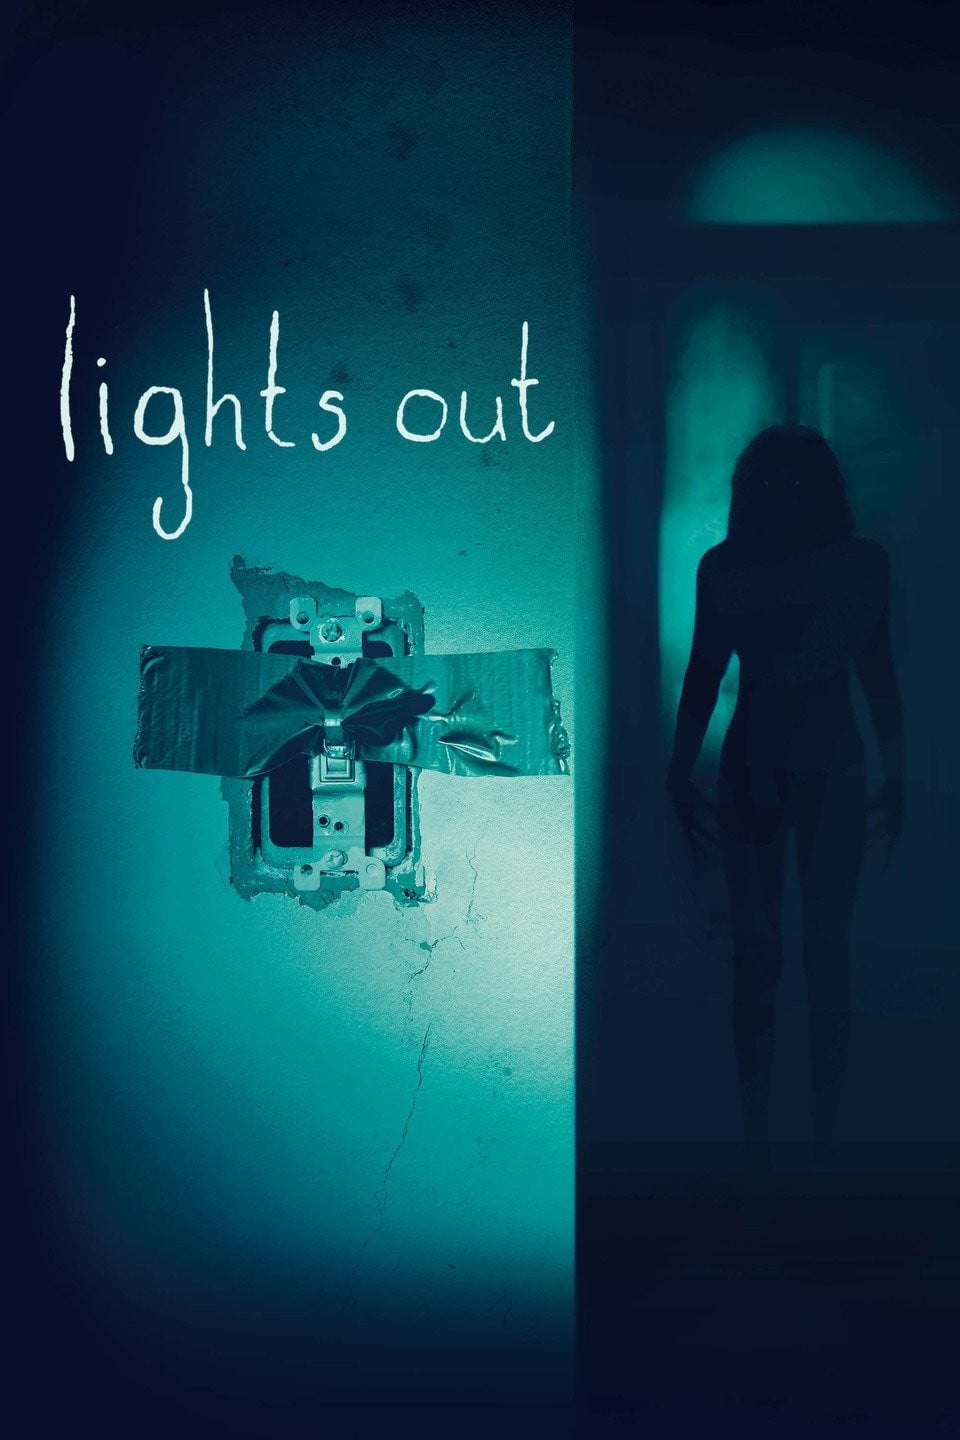 horror movie about lights